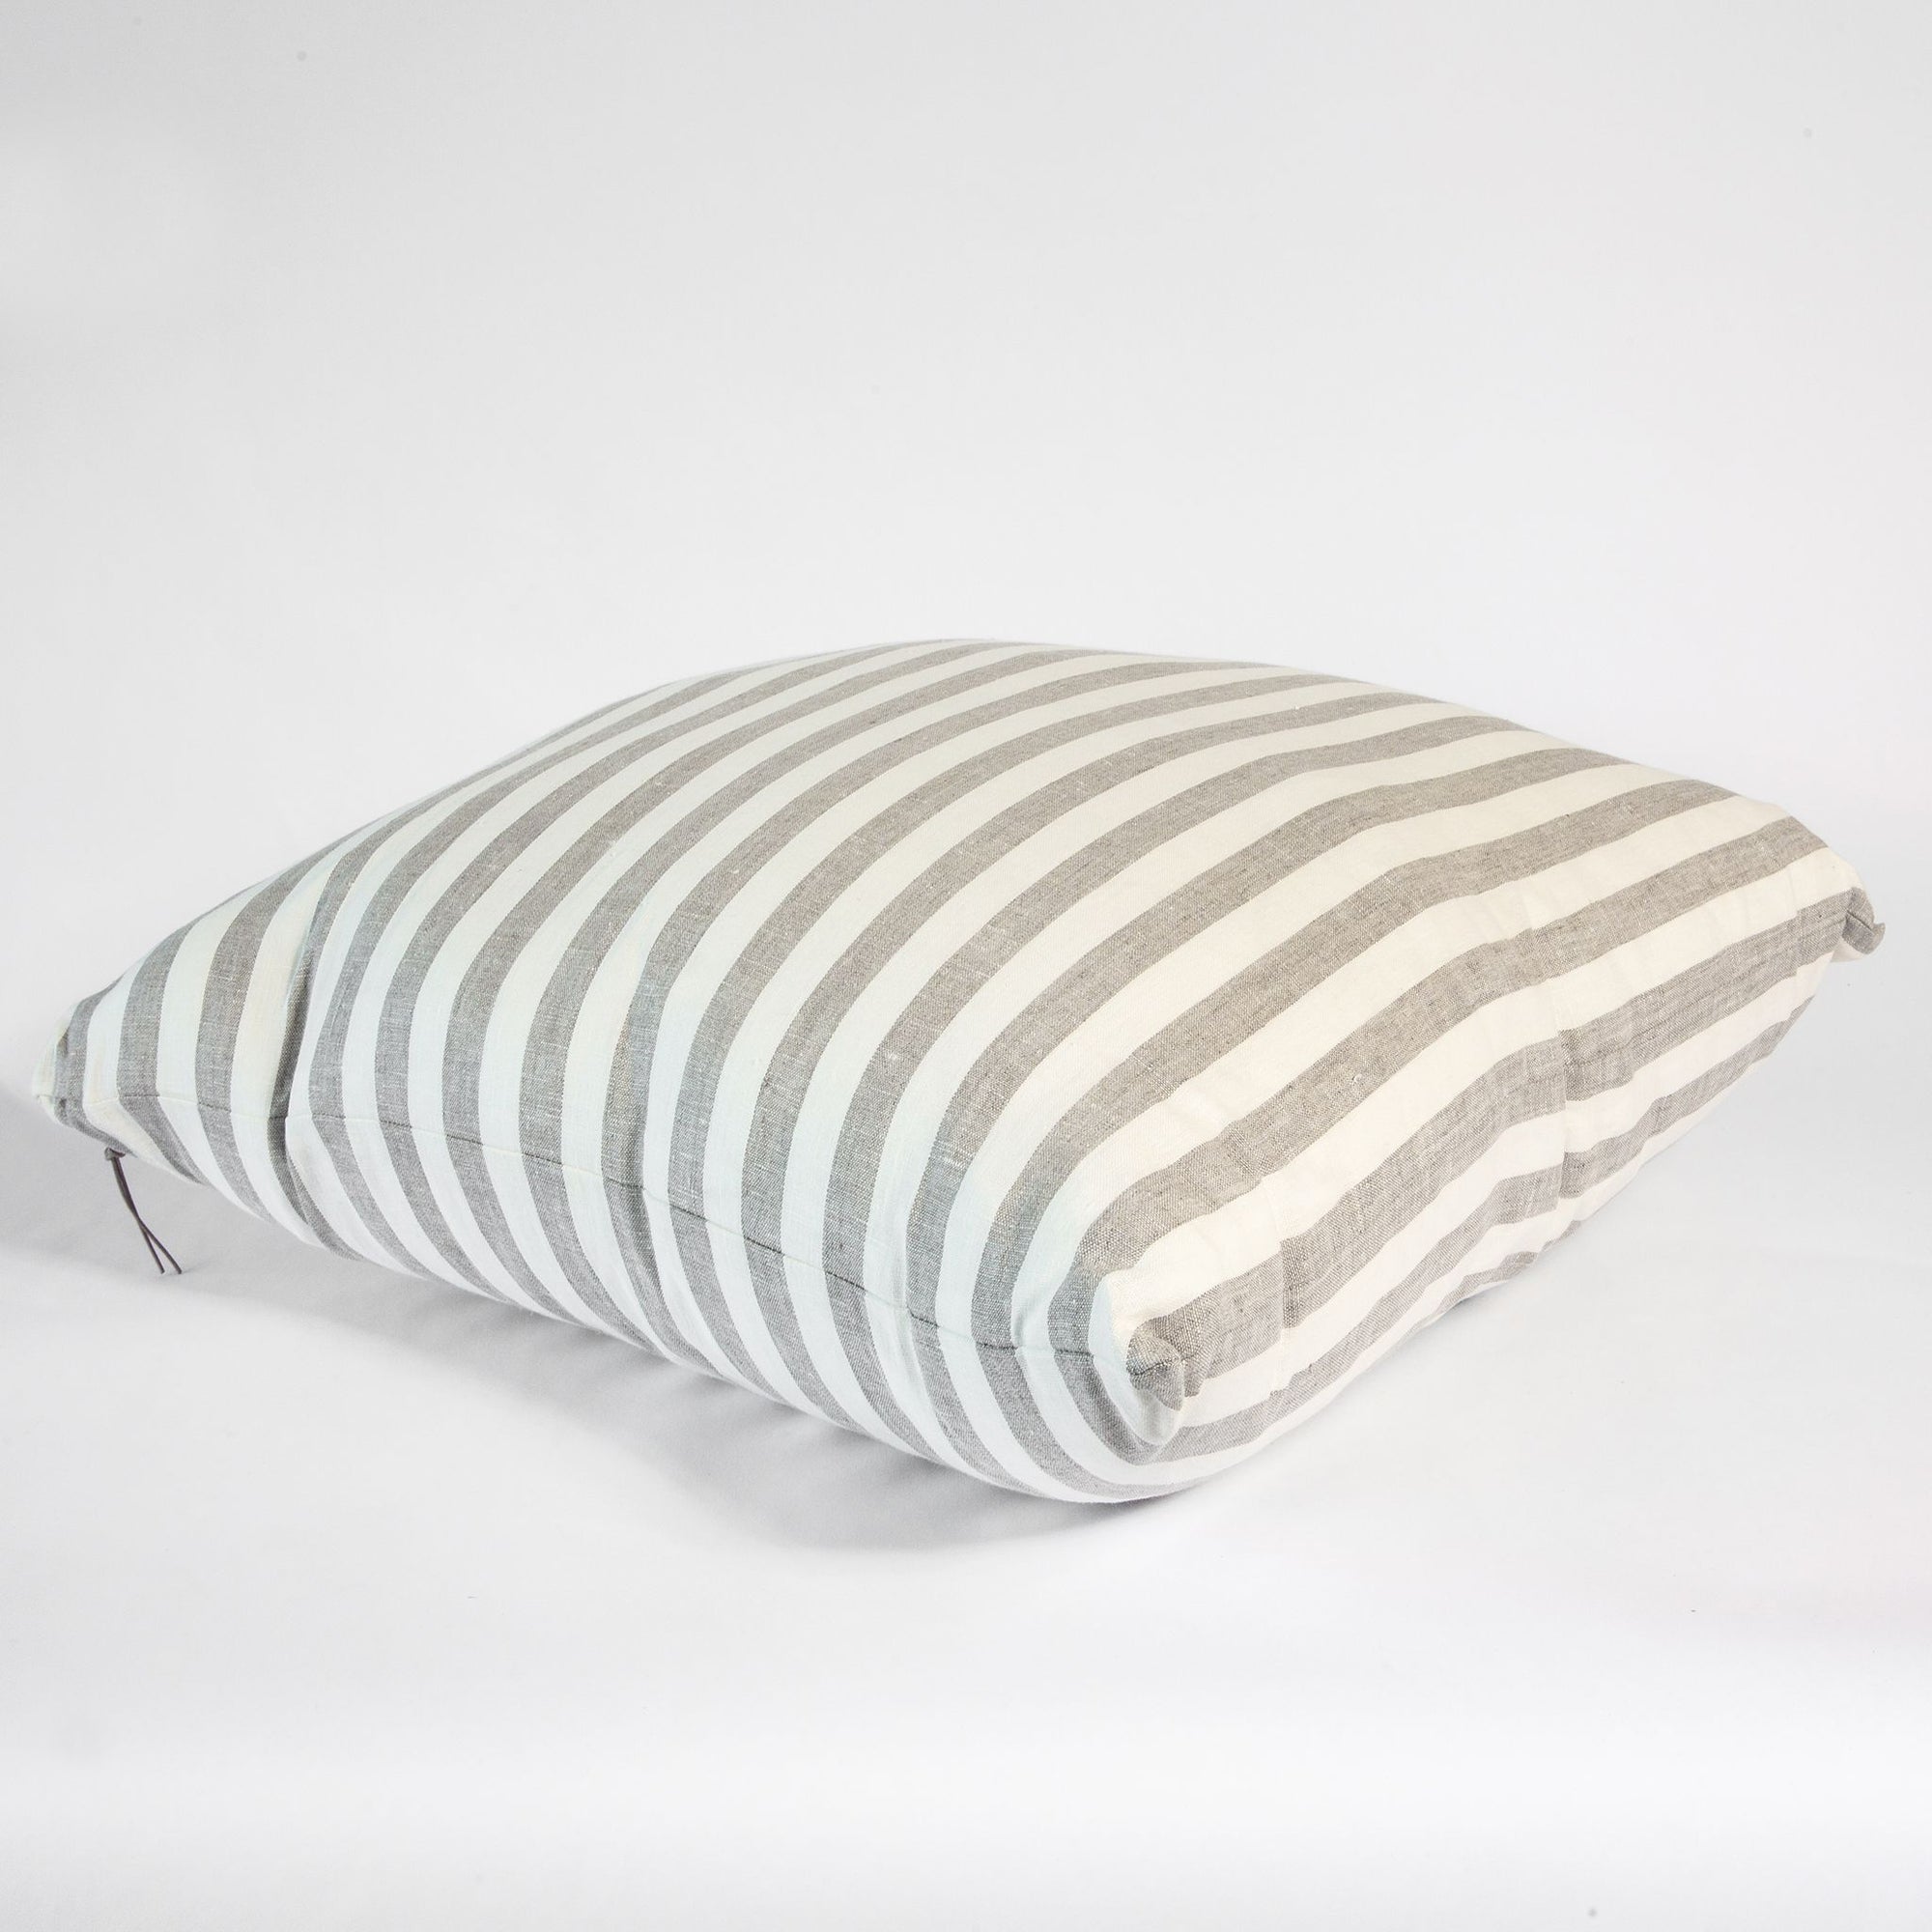 Overside striped linen pillow in grey and white.